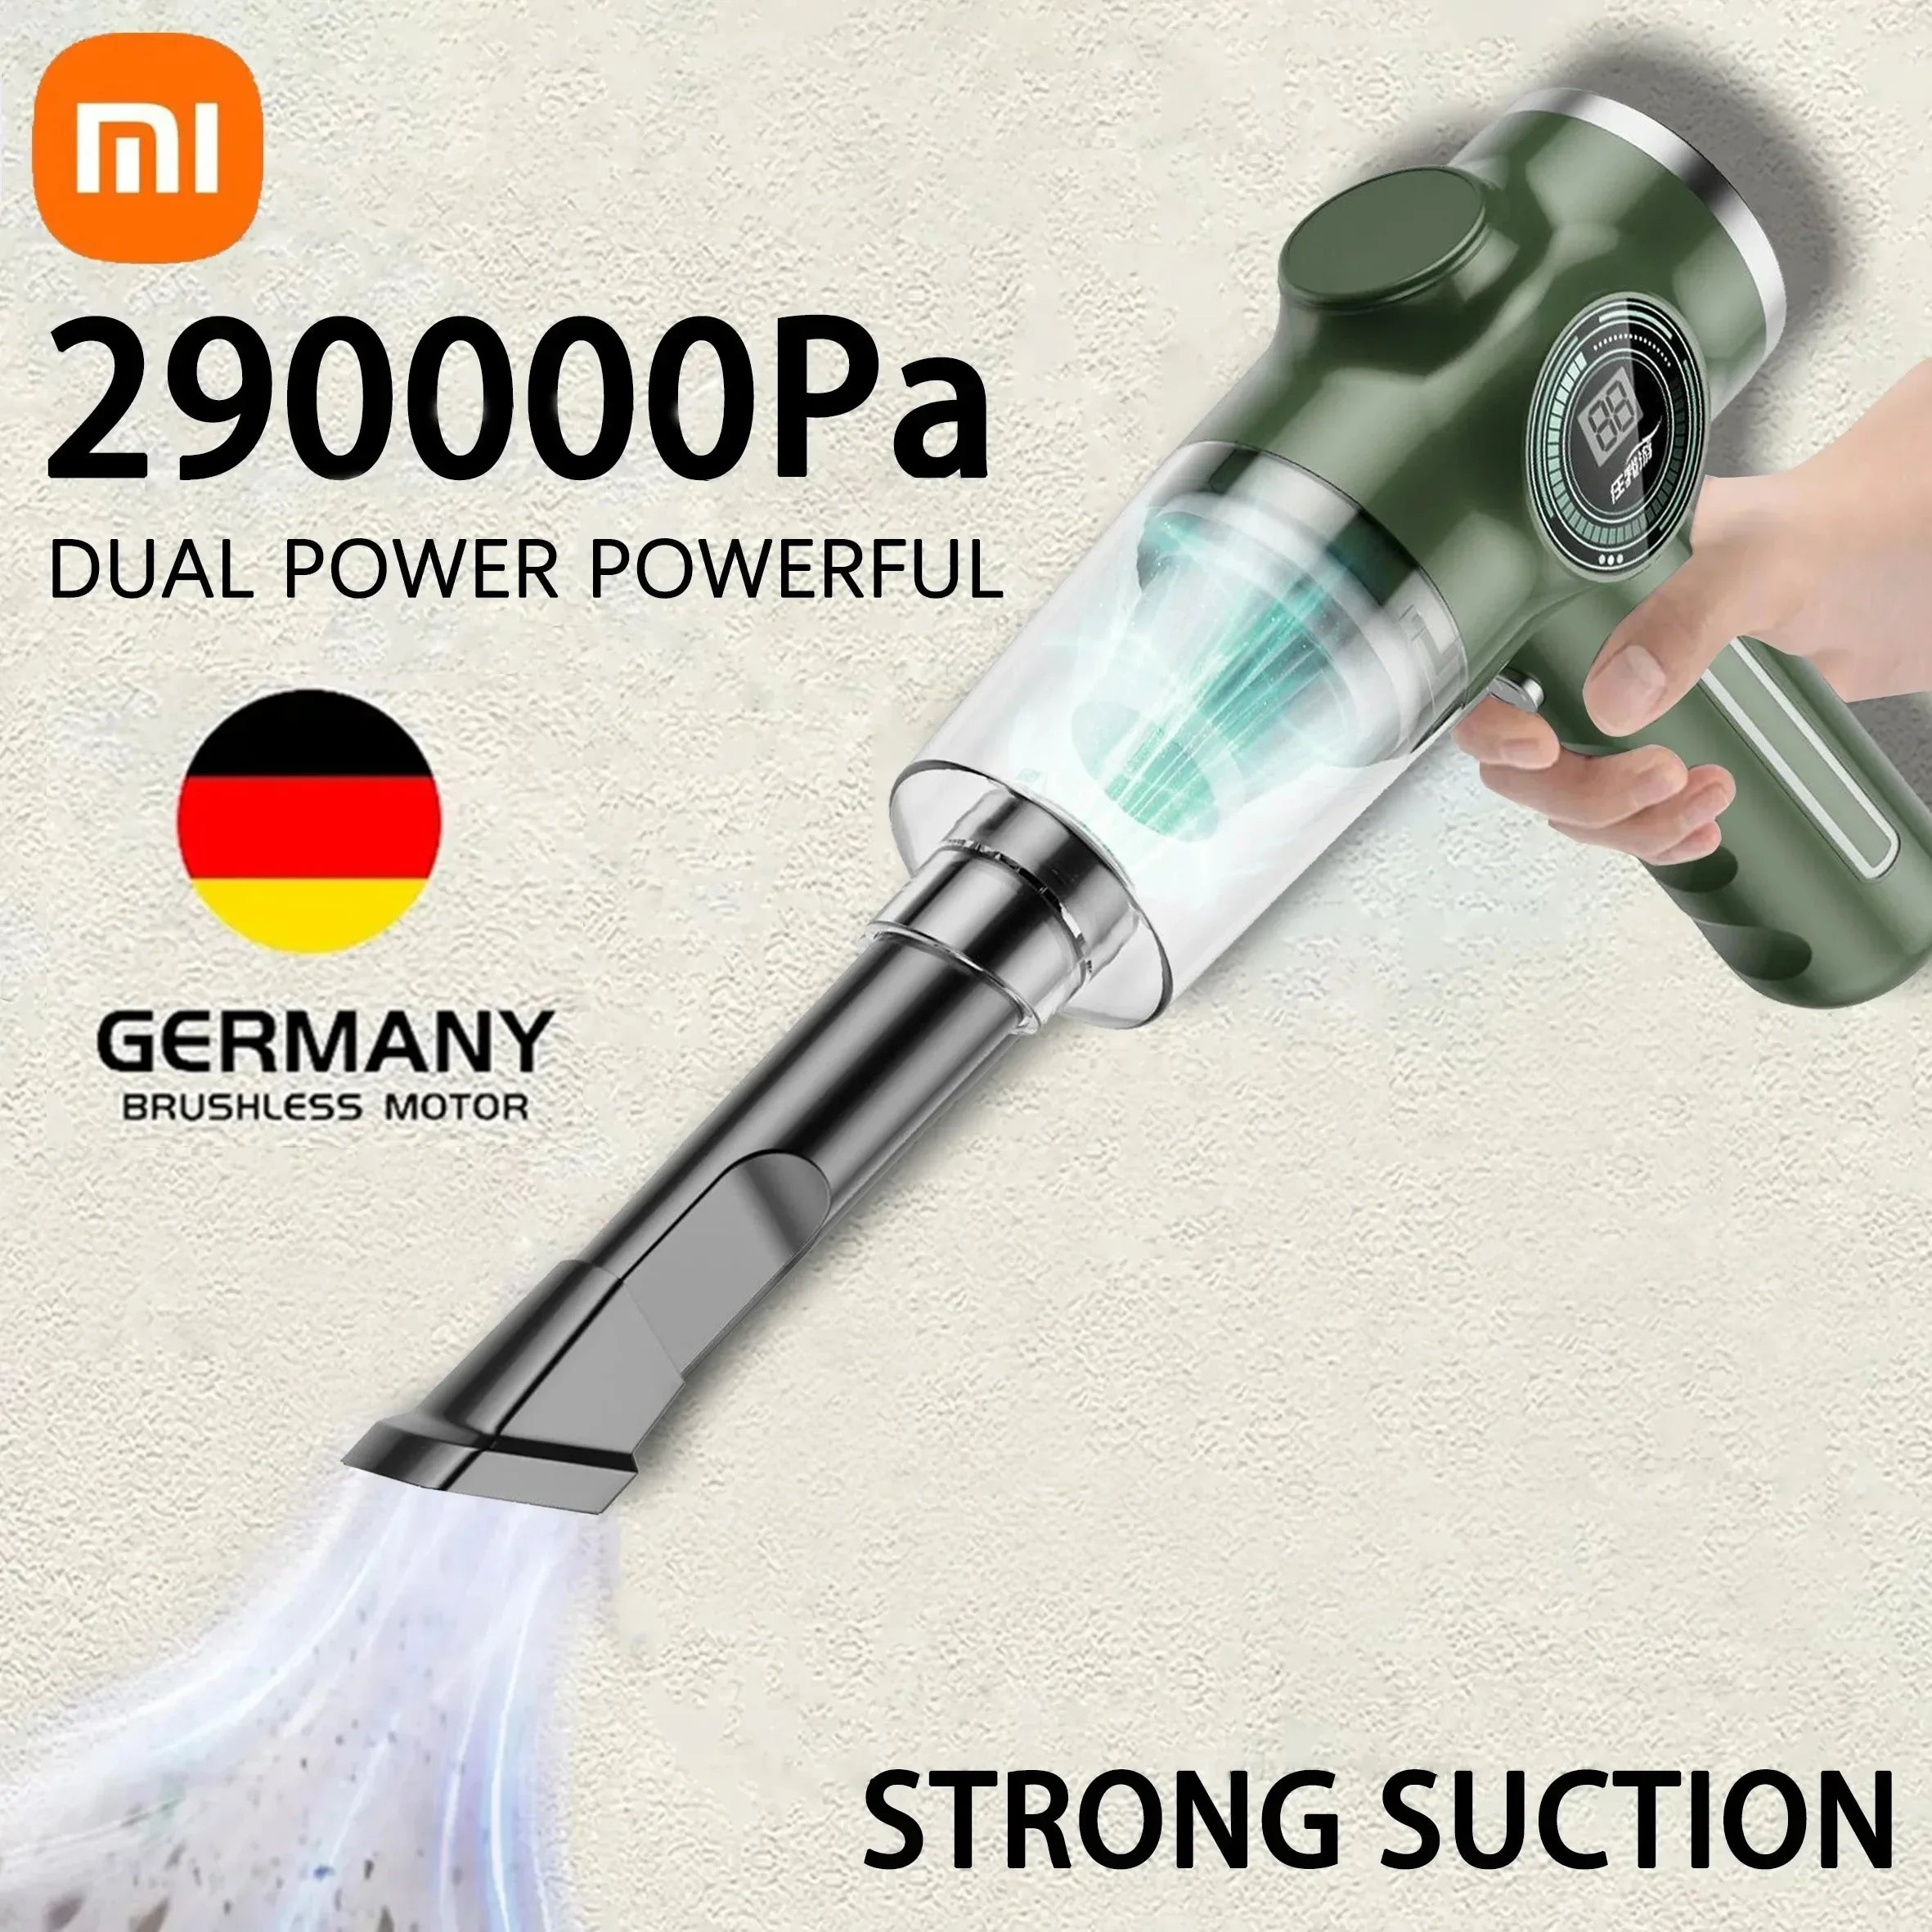 XIAOMI 5 in1 Wireless Automobile Vacuum Cleaner Portable Large Suction Handheld Dust Collector Machine Small Mini Dust Blower